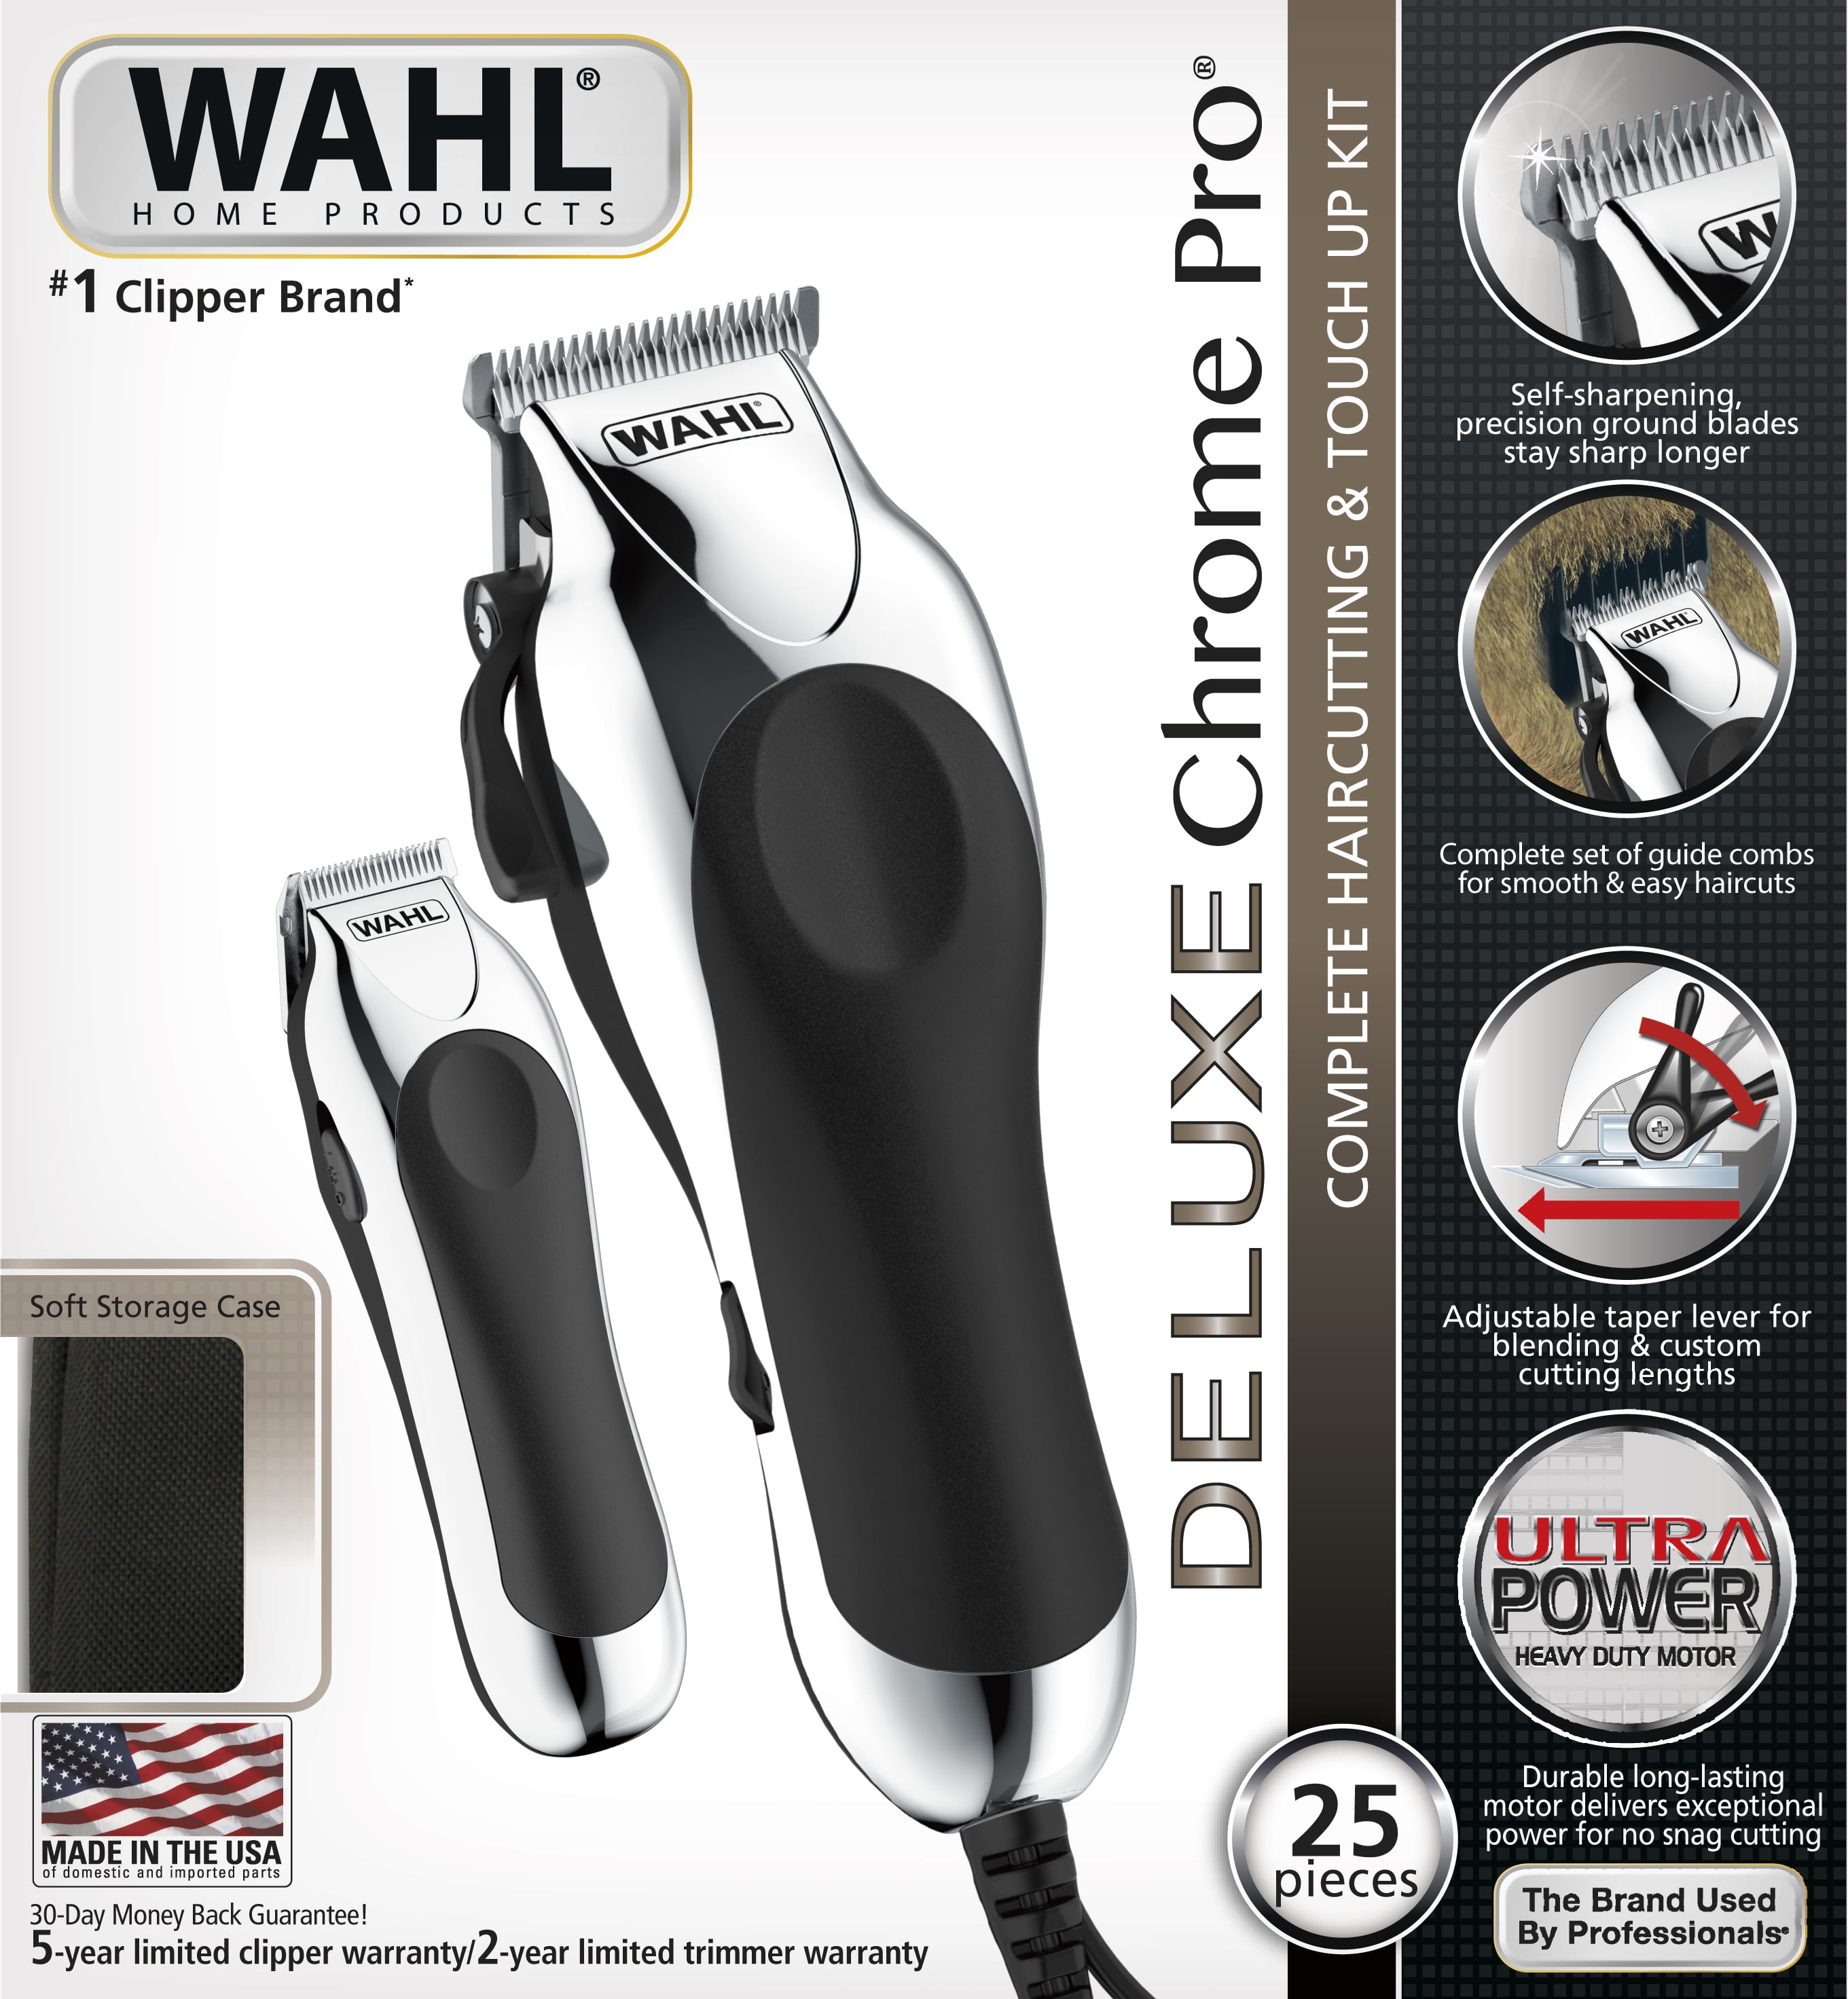 wahl deluxe chrome pro hair clipper kit